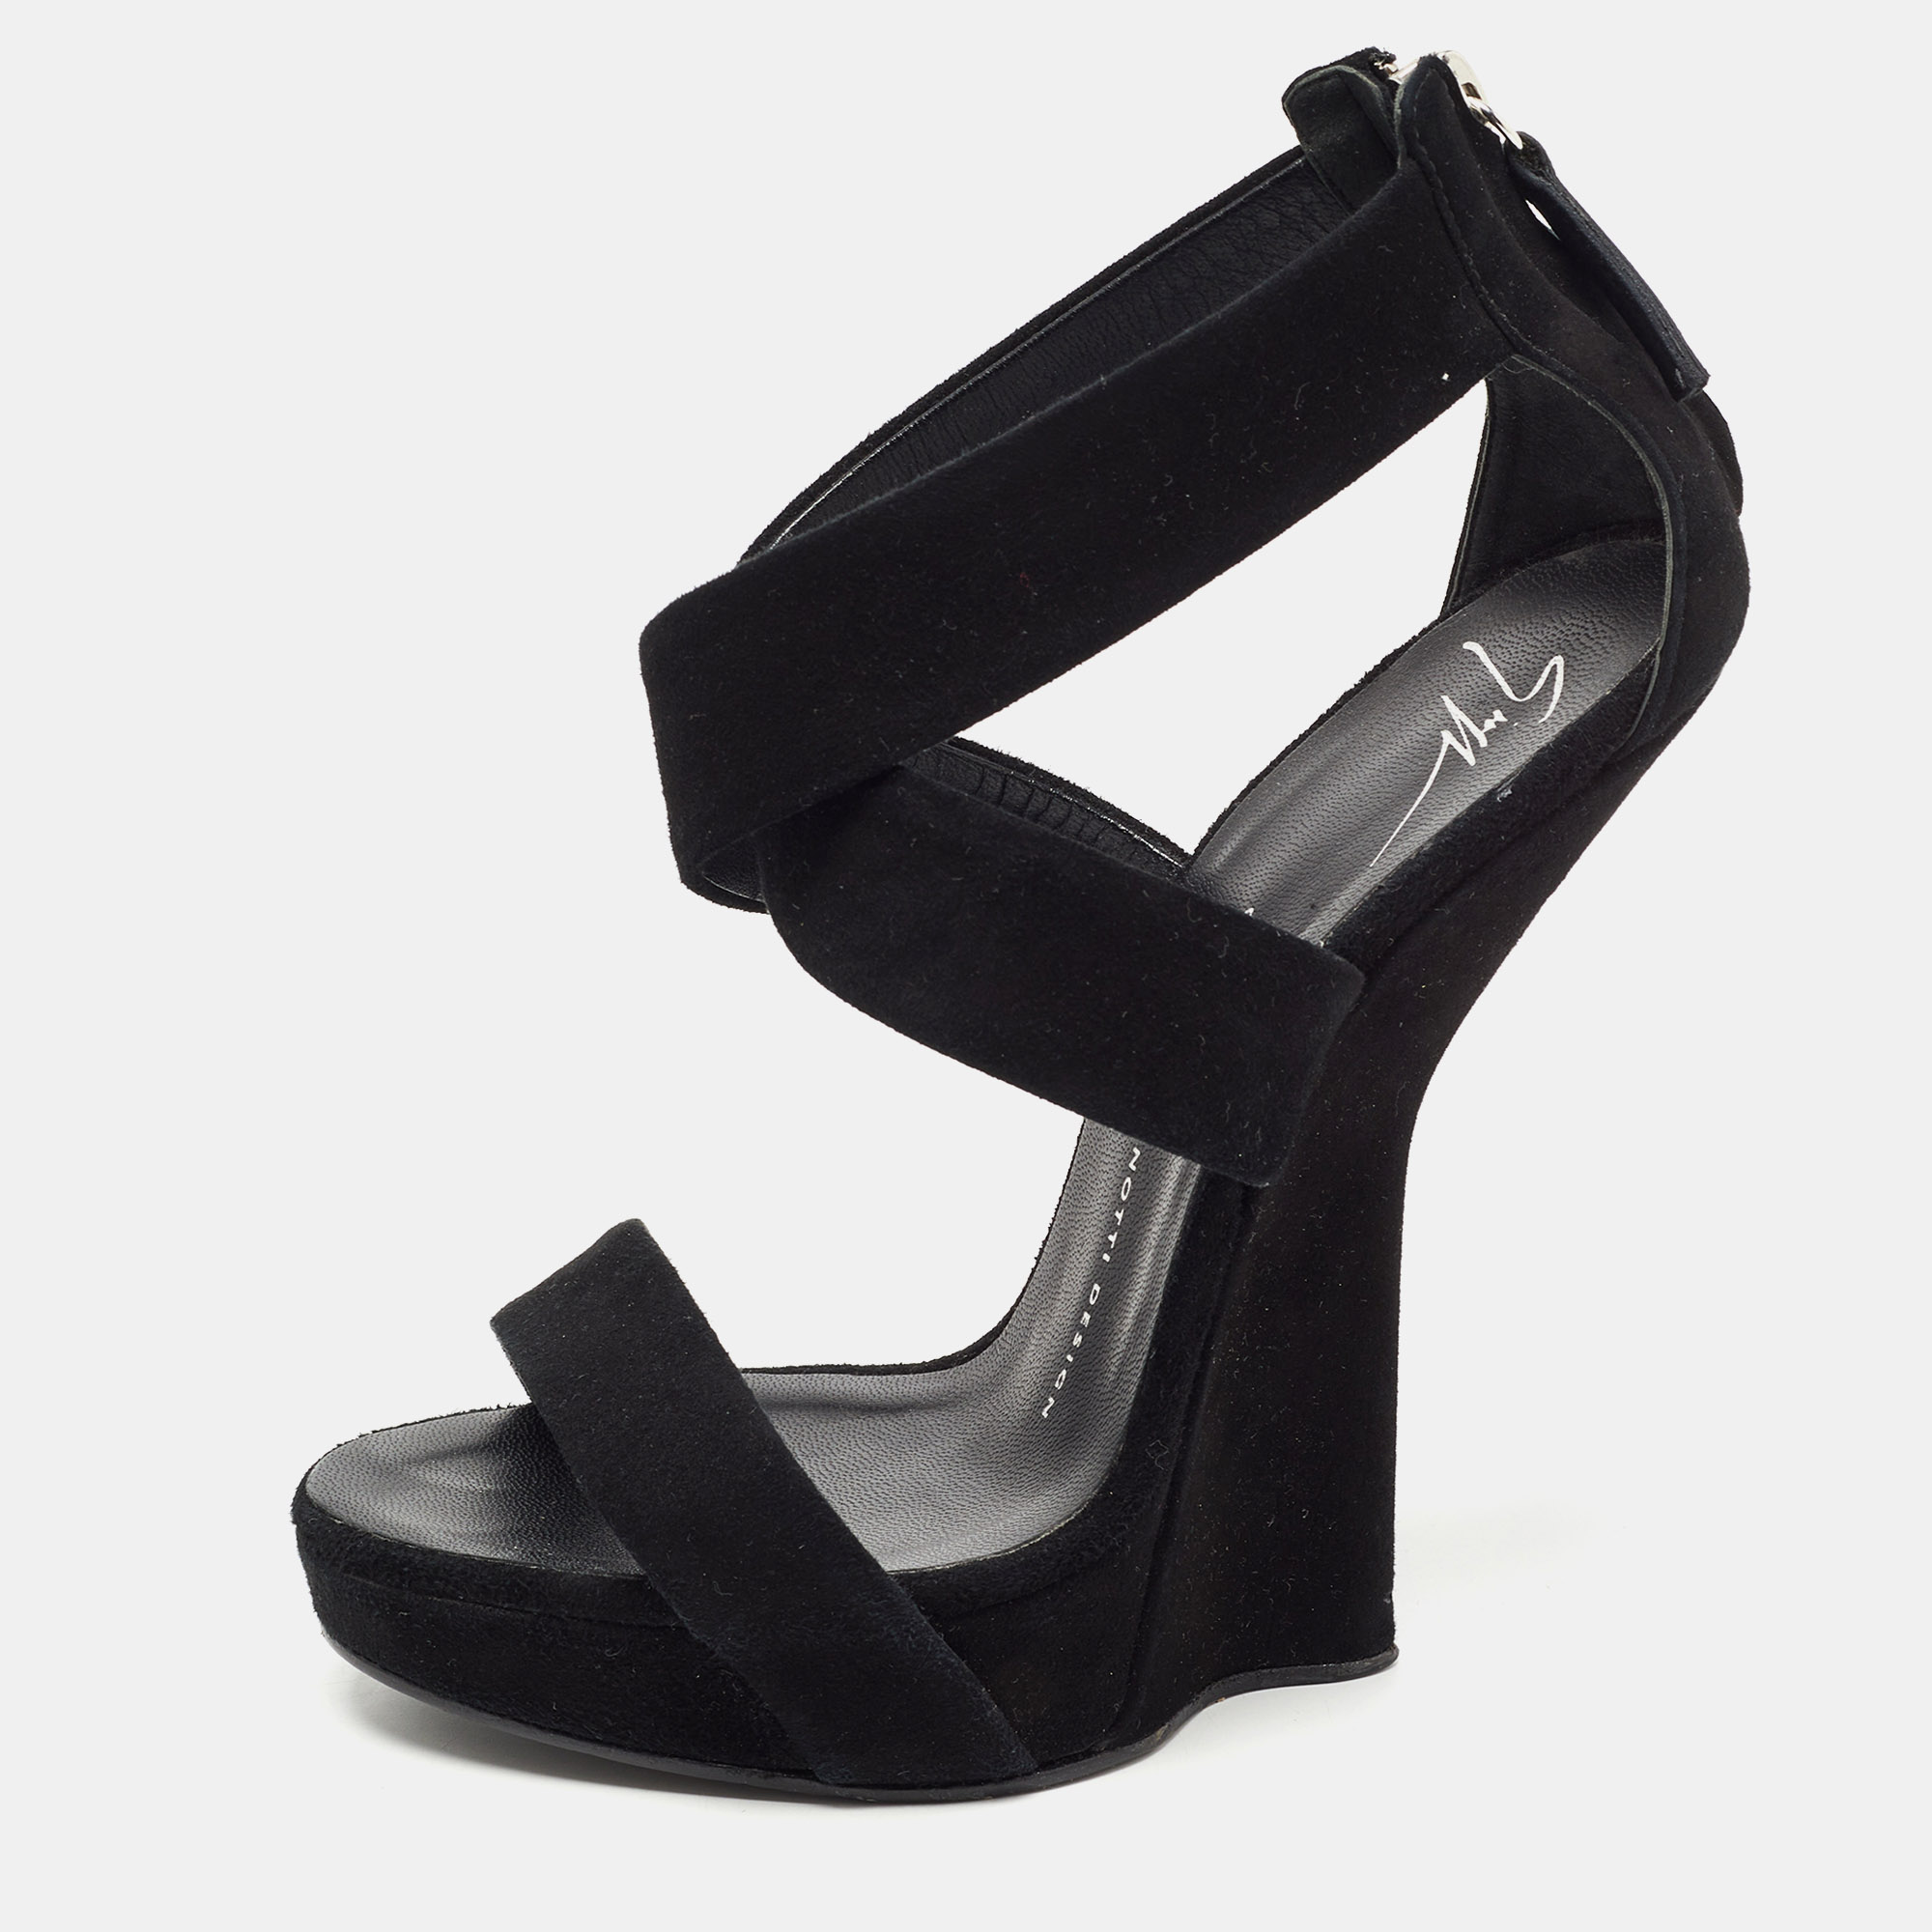 

Giuseppe Zanotti Black Suede Ankle Wrap Wedge Sandals Size